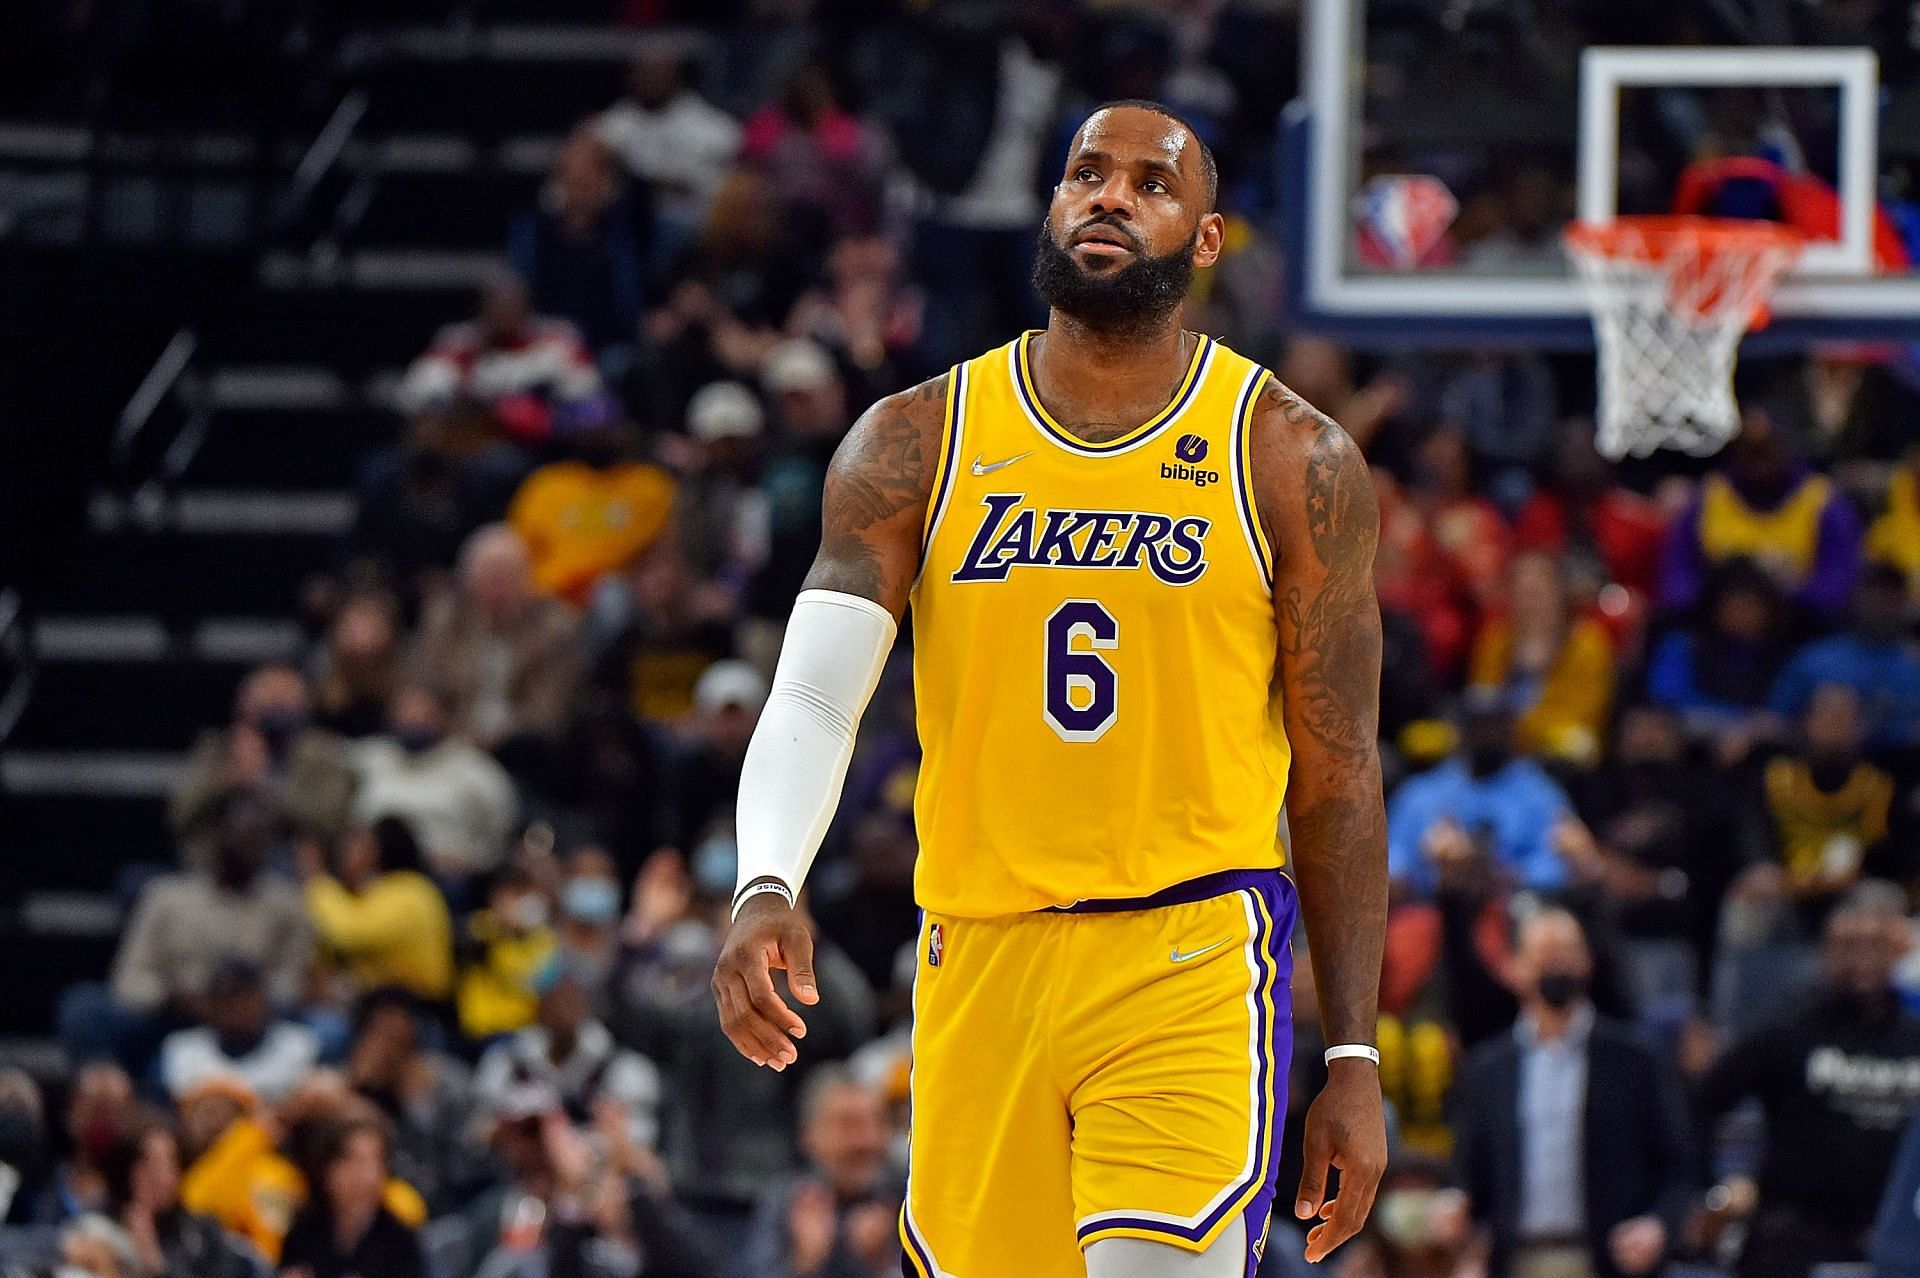 LeBron James came up with a dominant performance in the LA Lakers&#039; easy win against the OKC Thunder